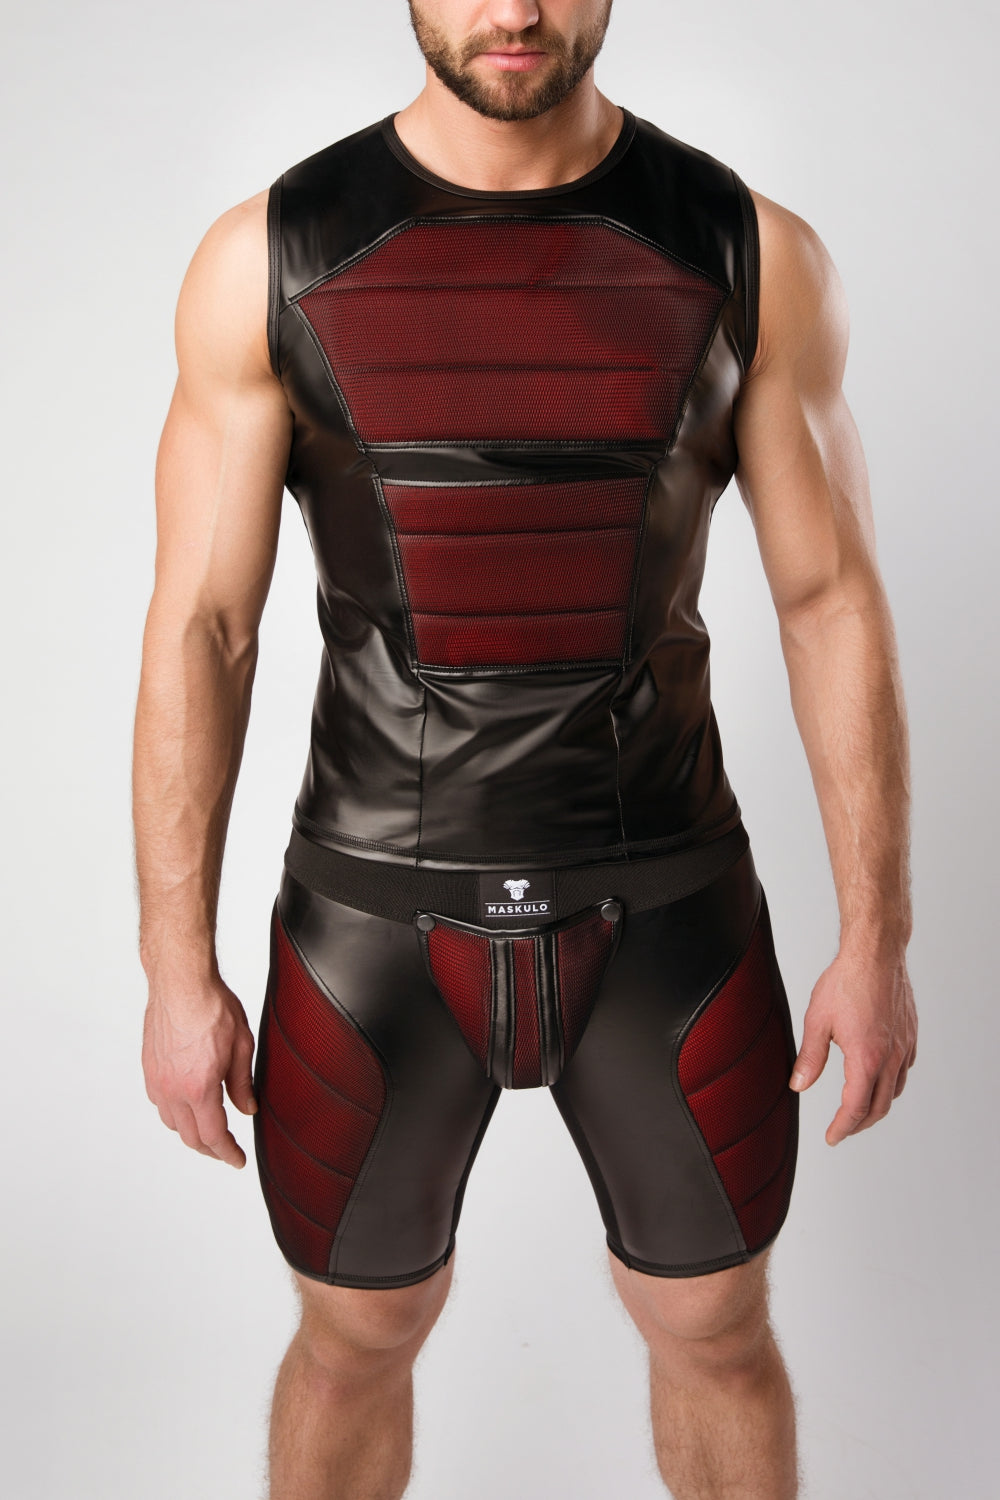 Armored. Rubber look Briefs. Detachable pouch. Zippered rear